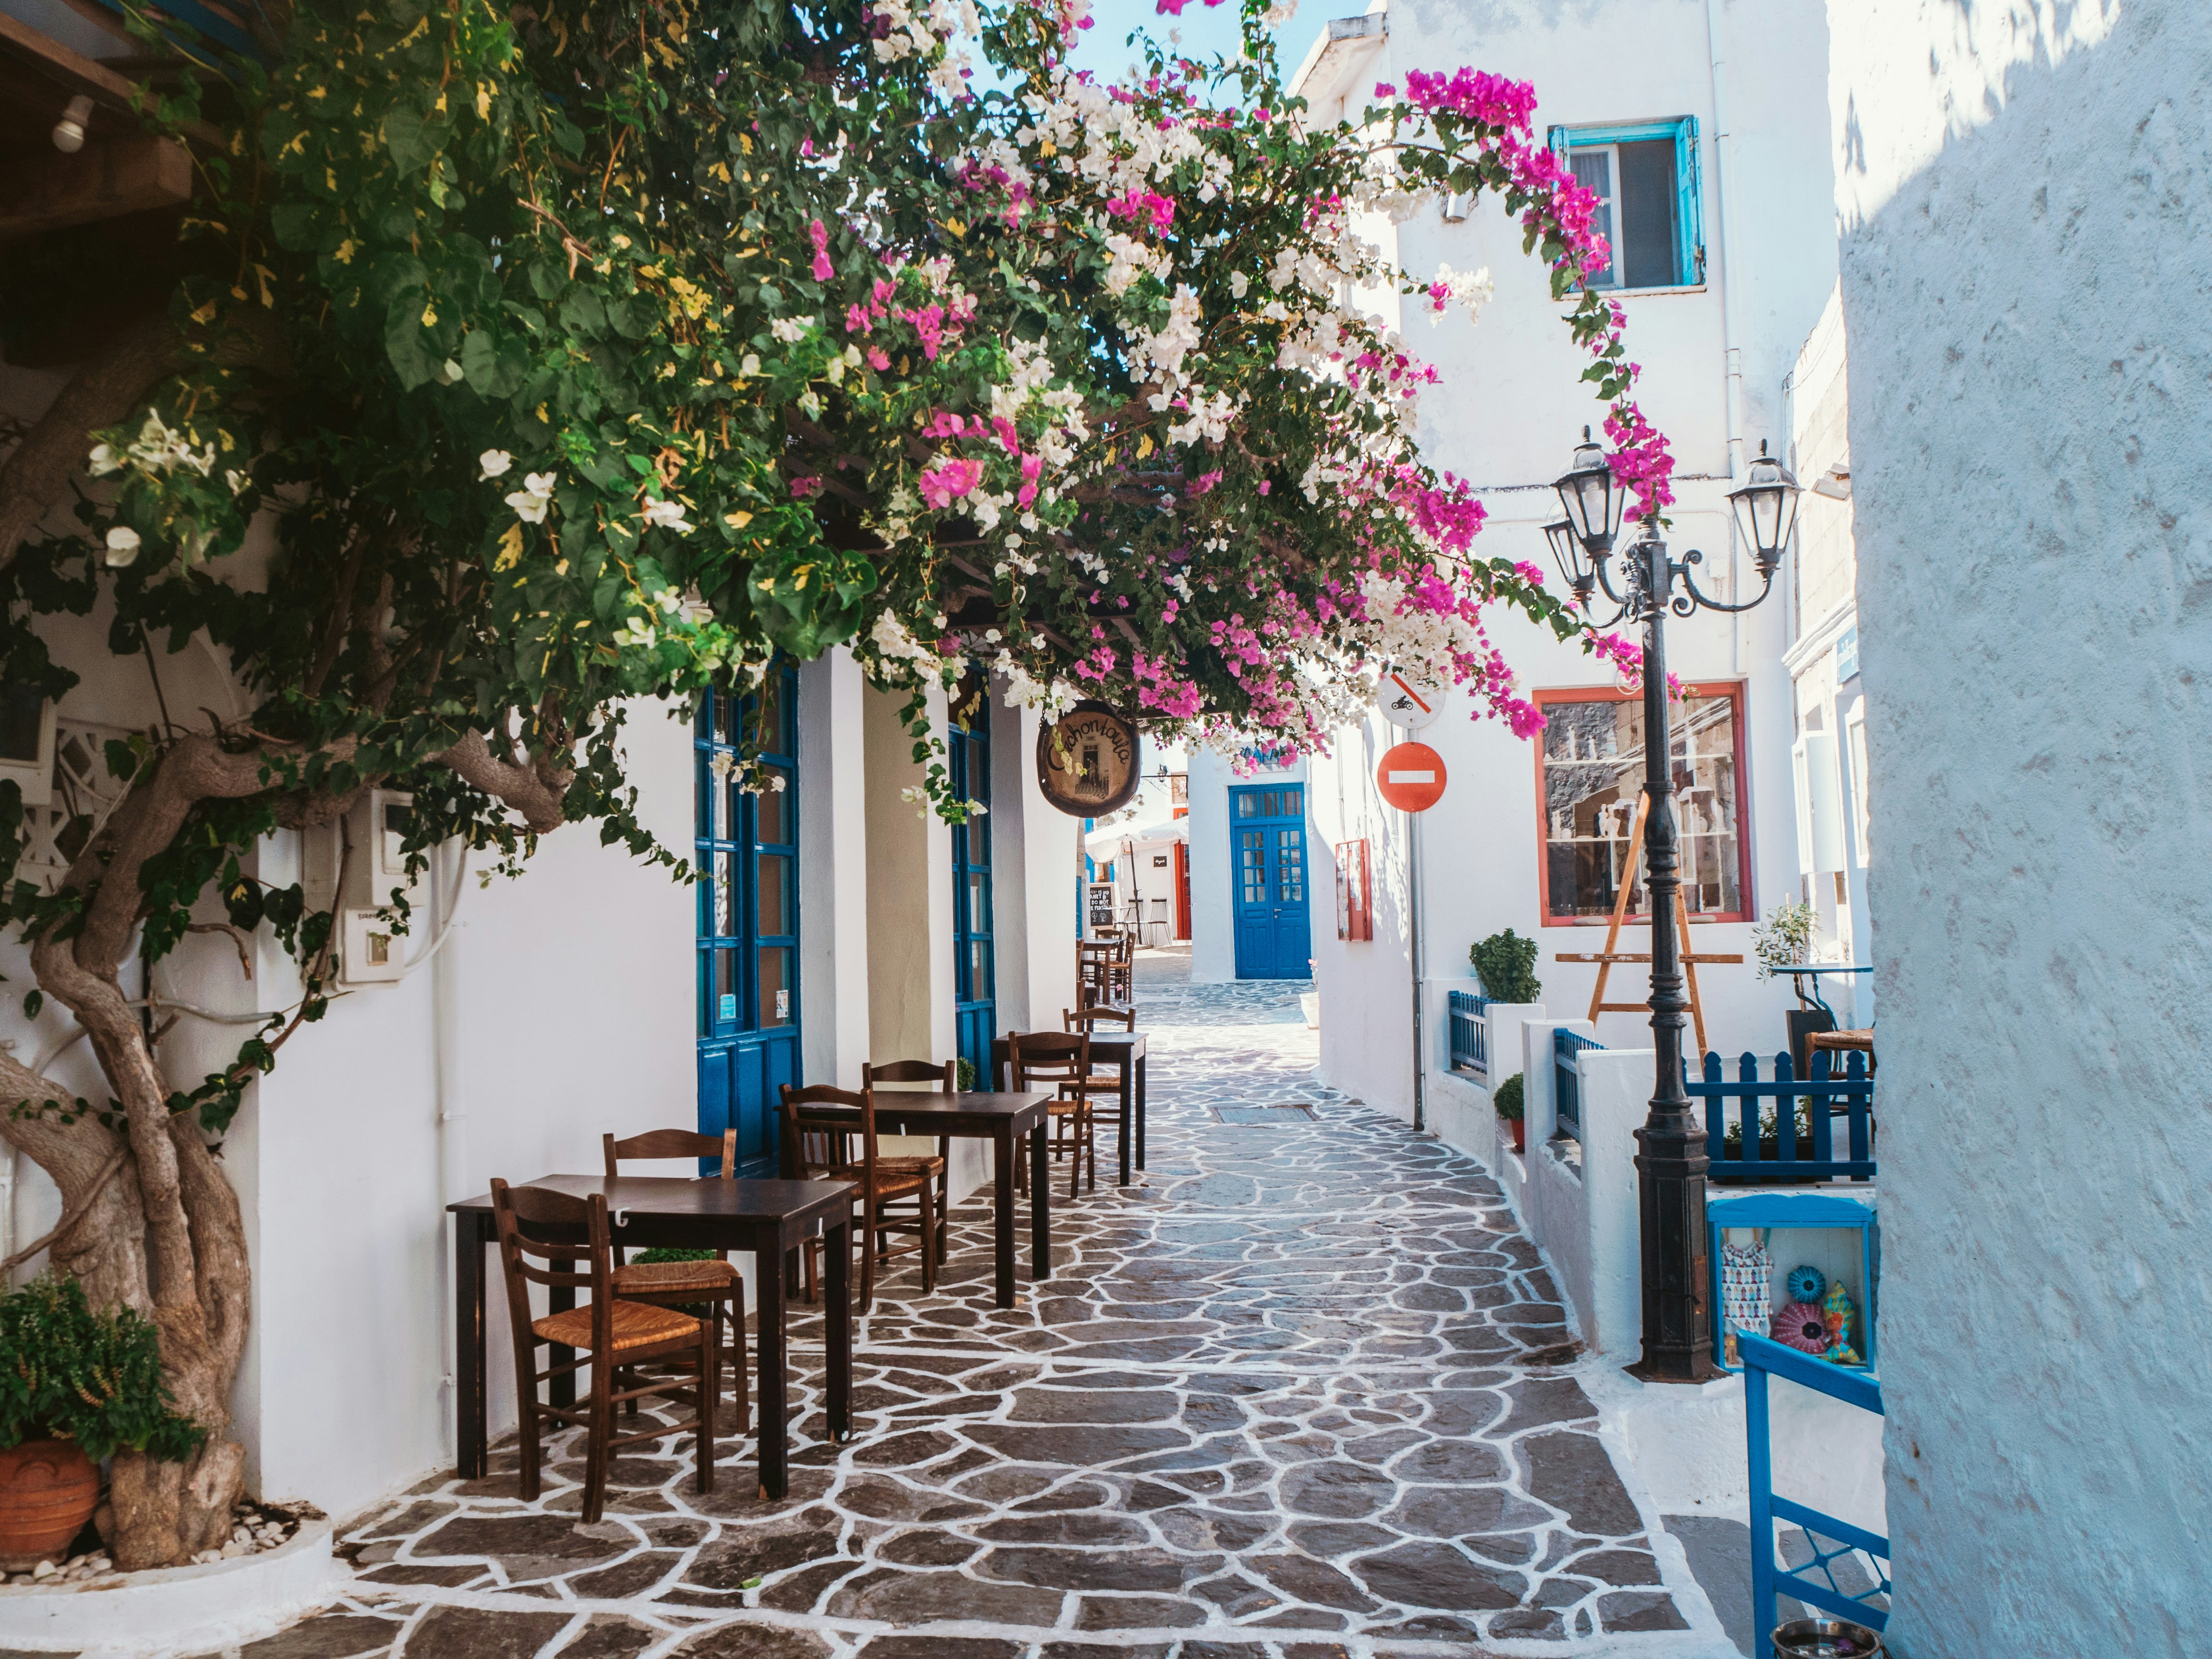 Picturesque street in a white Greek village with beautiful flowers